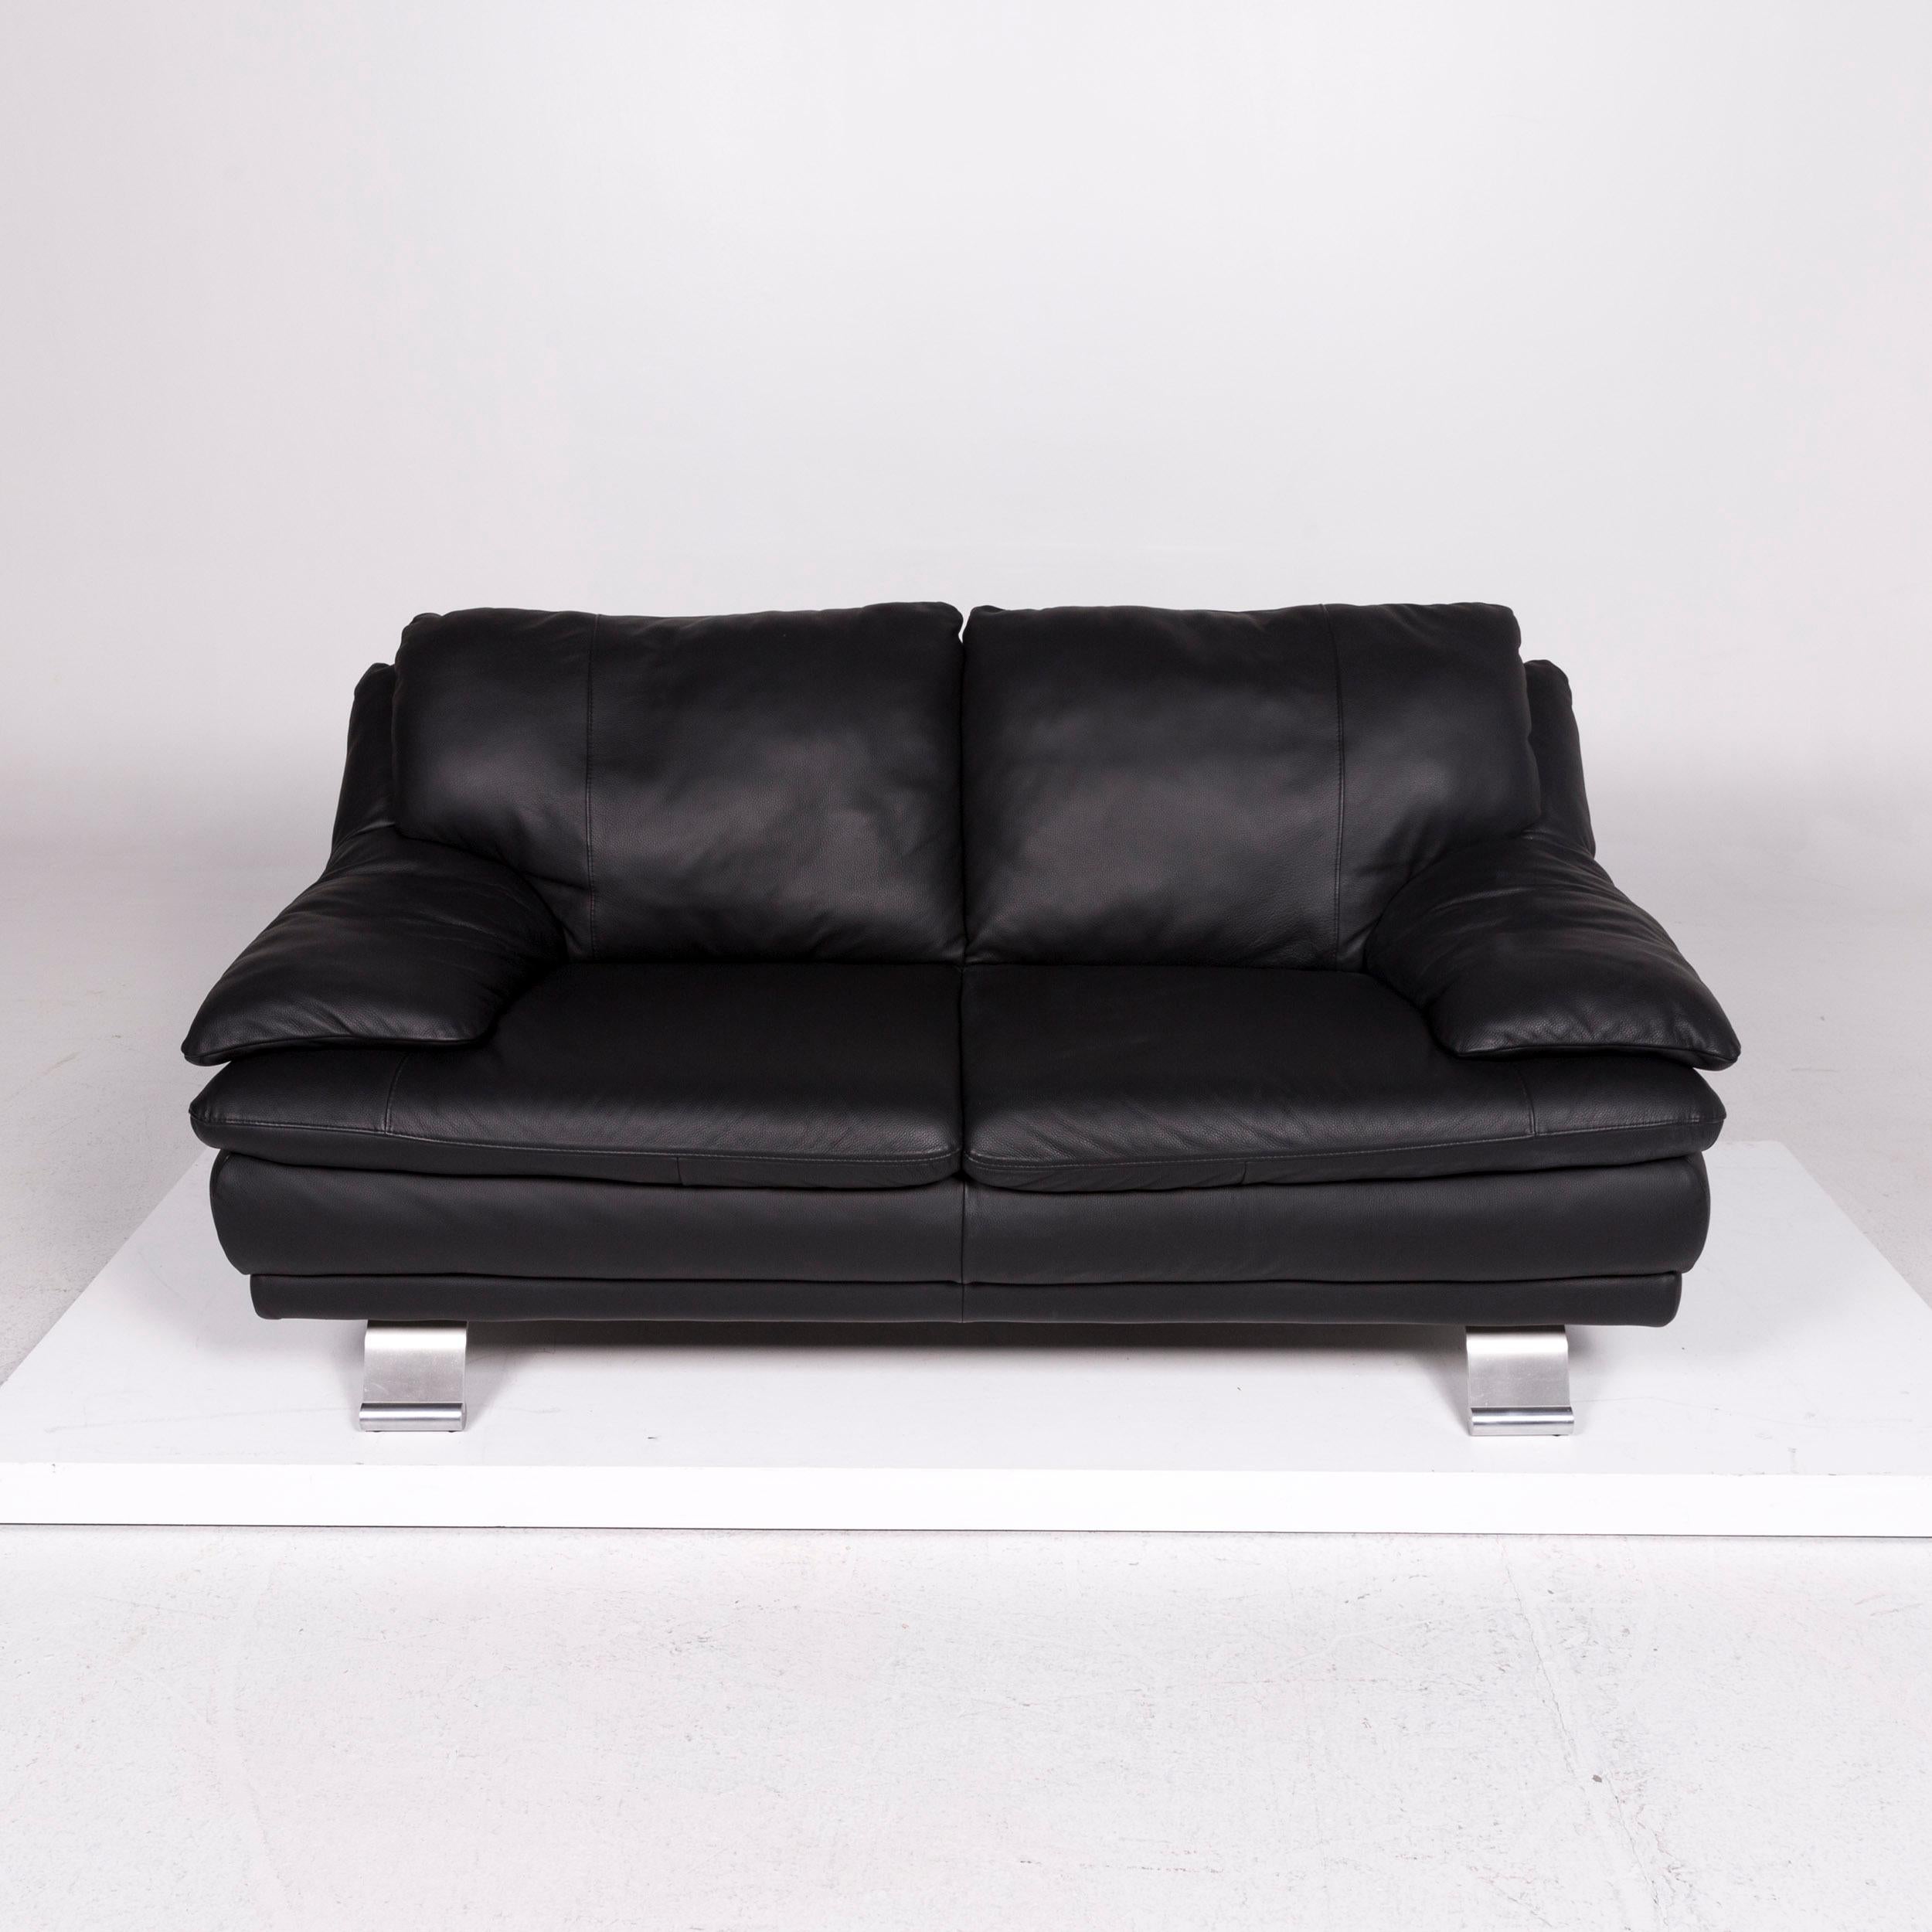 Italian Italsofa Leather Sofa Black Two-Seat Couch